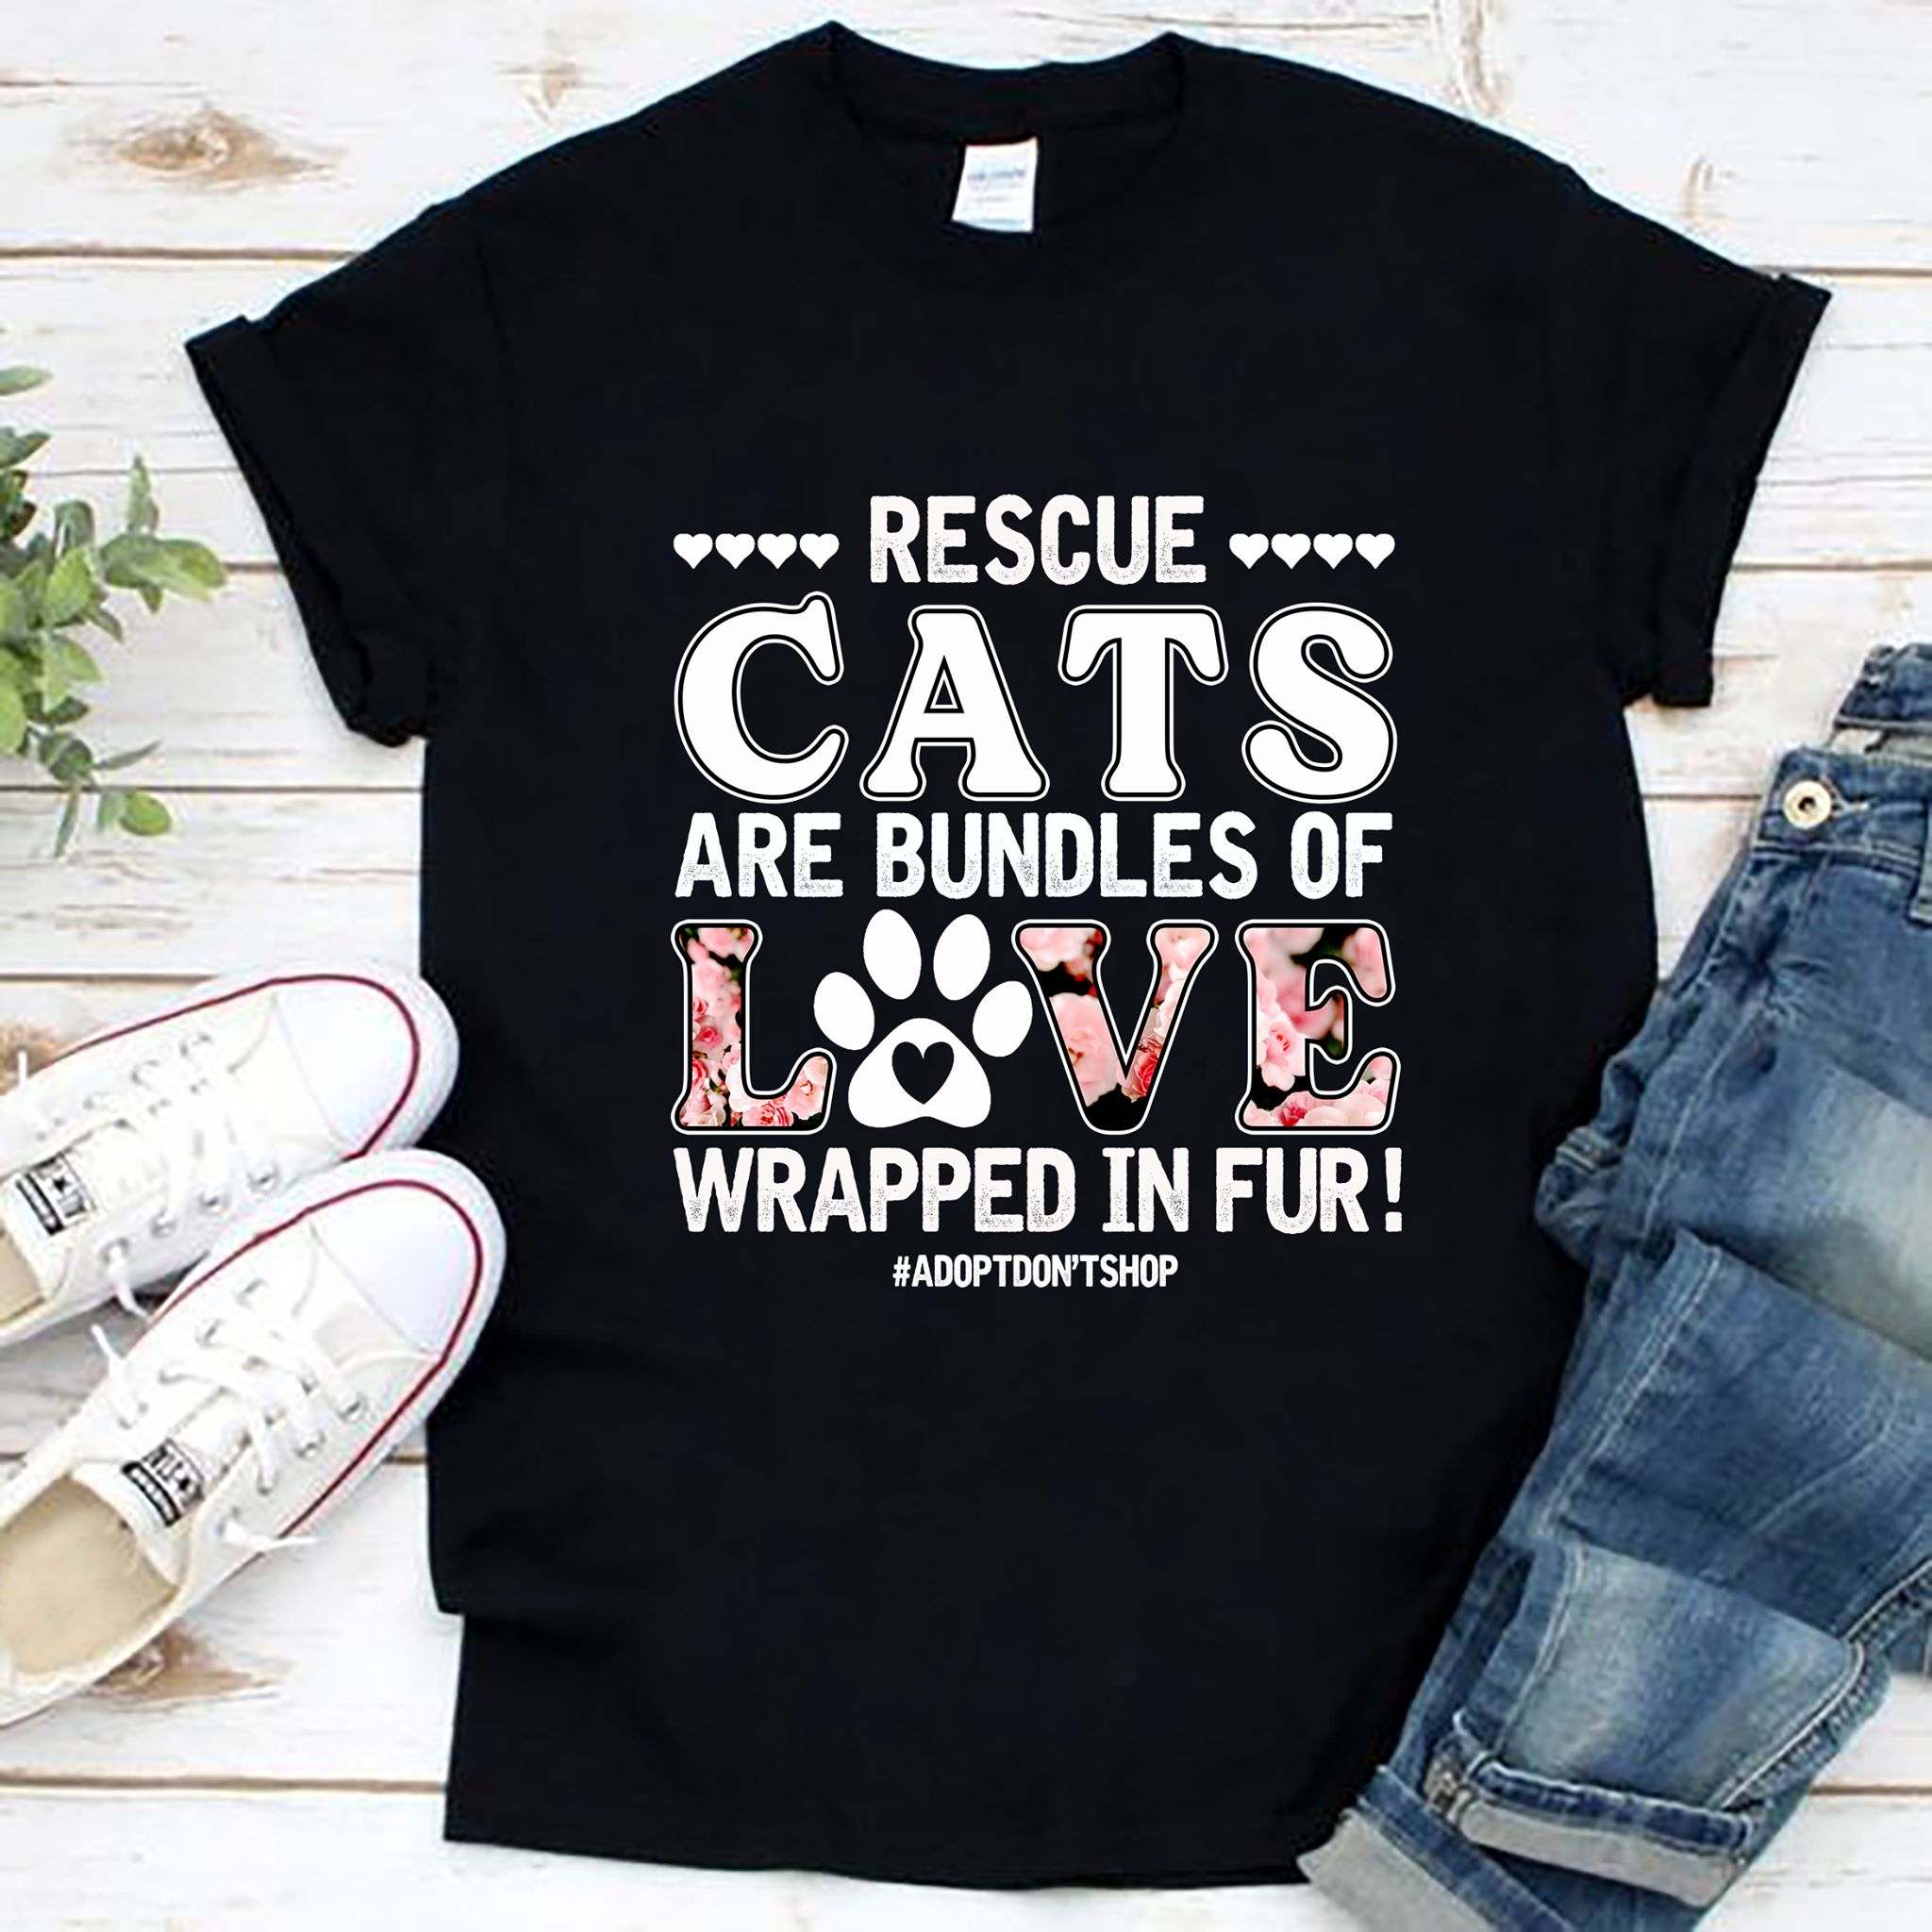 Rescue cats are bundles of love wrapped in fure - Adopt don't shop